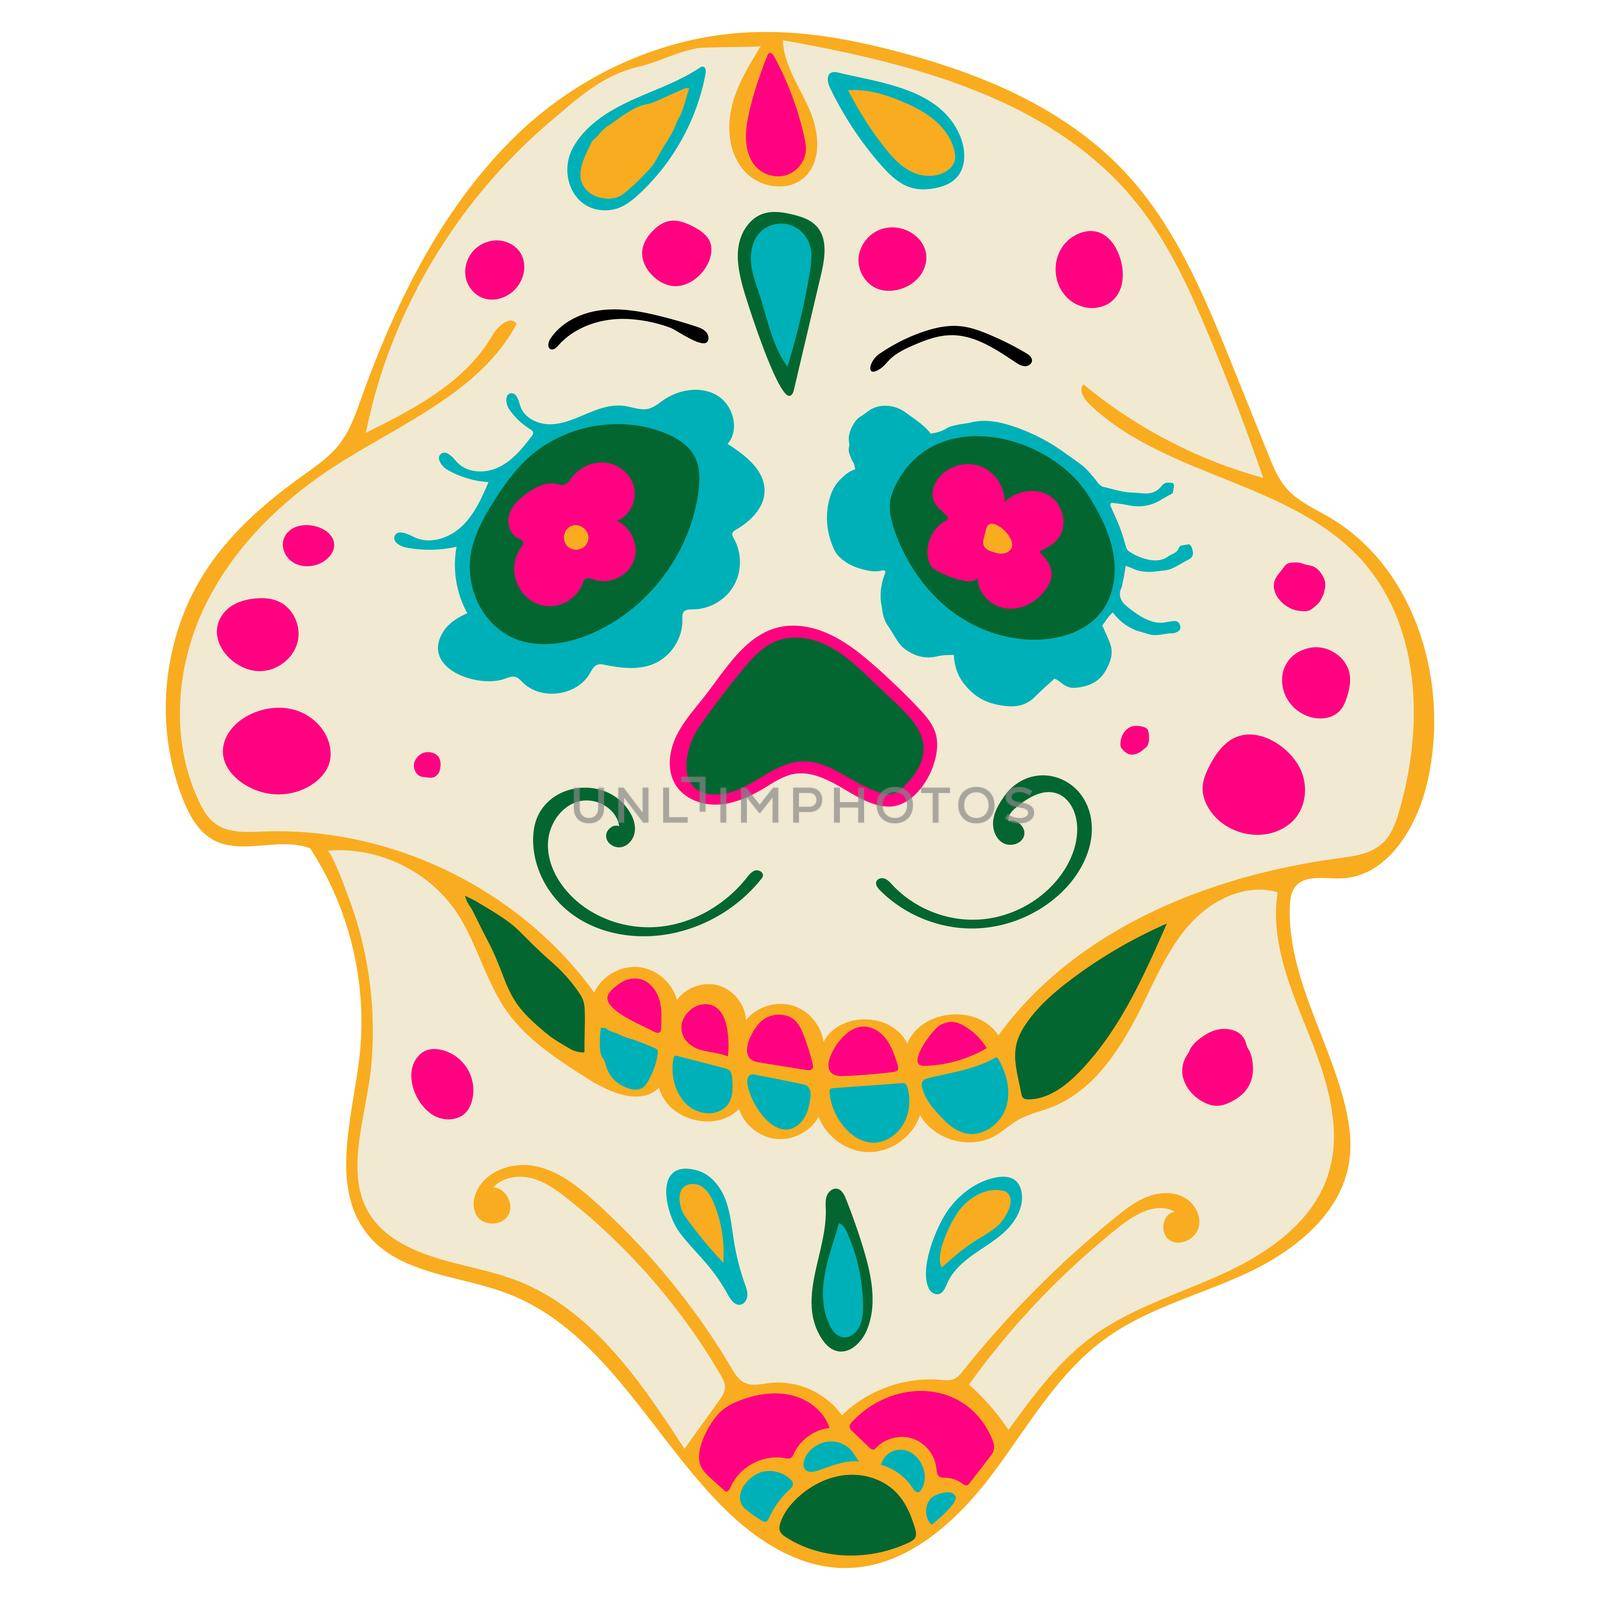 Day of the Dead, Dia de los Muertos. Sugar Skull with Colorful Mexican Elements and Flowers. Fiesta, Halloween, Holiday Poster, Party Flyer.